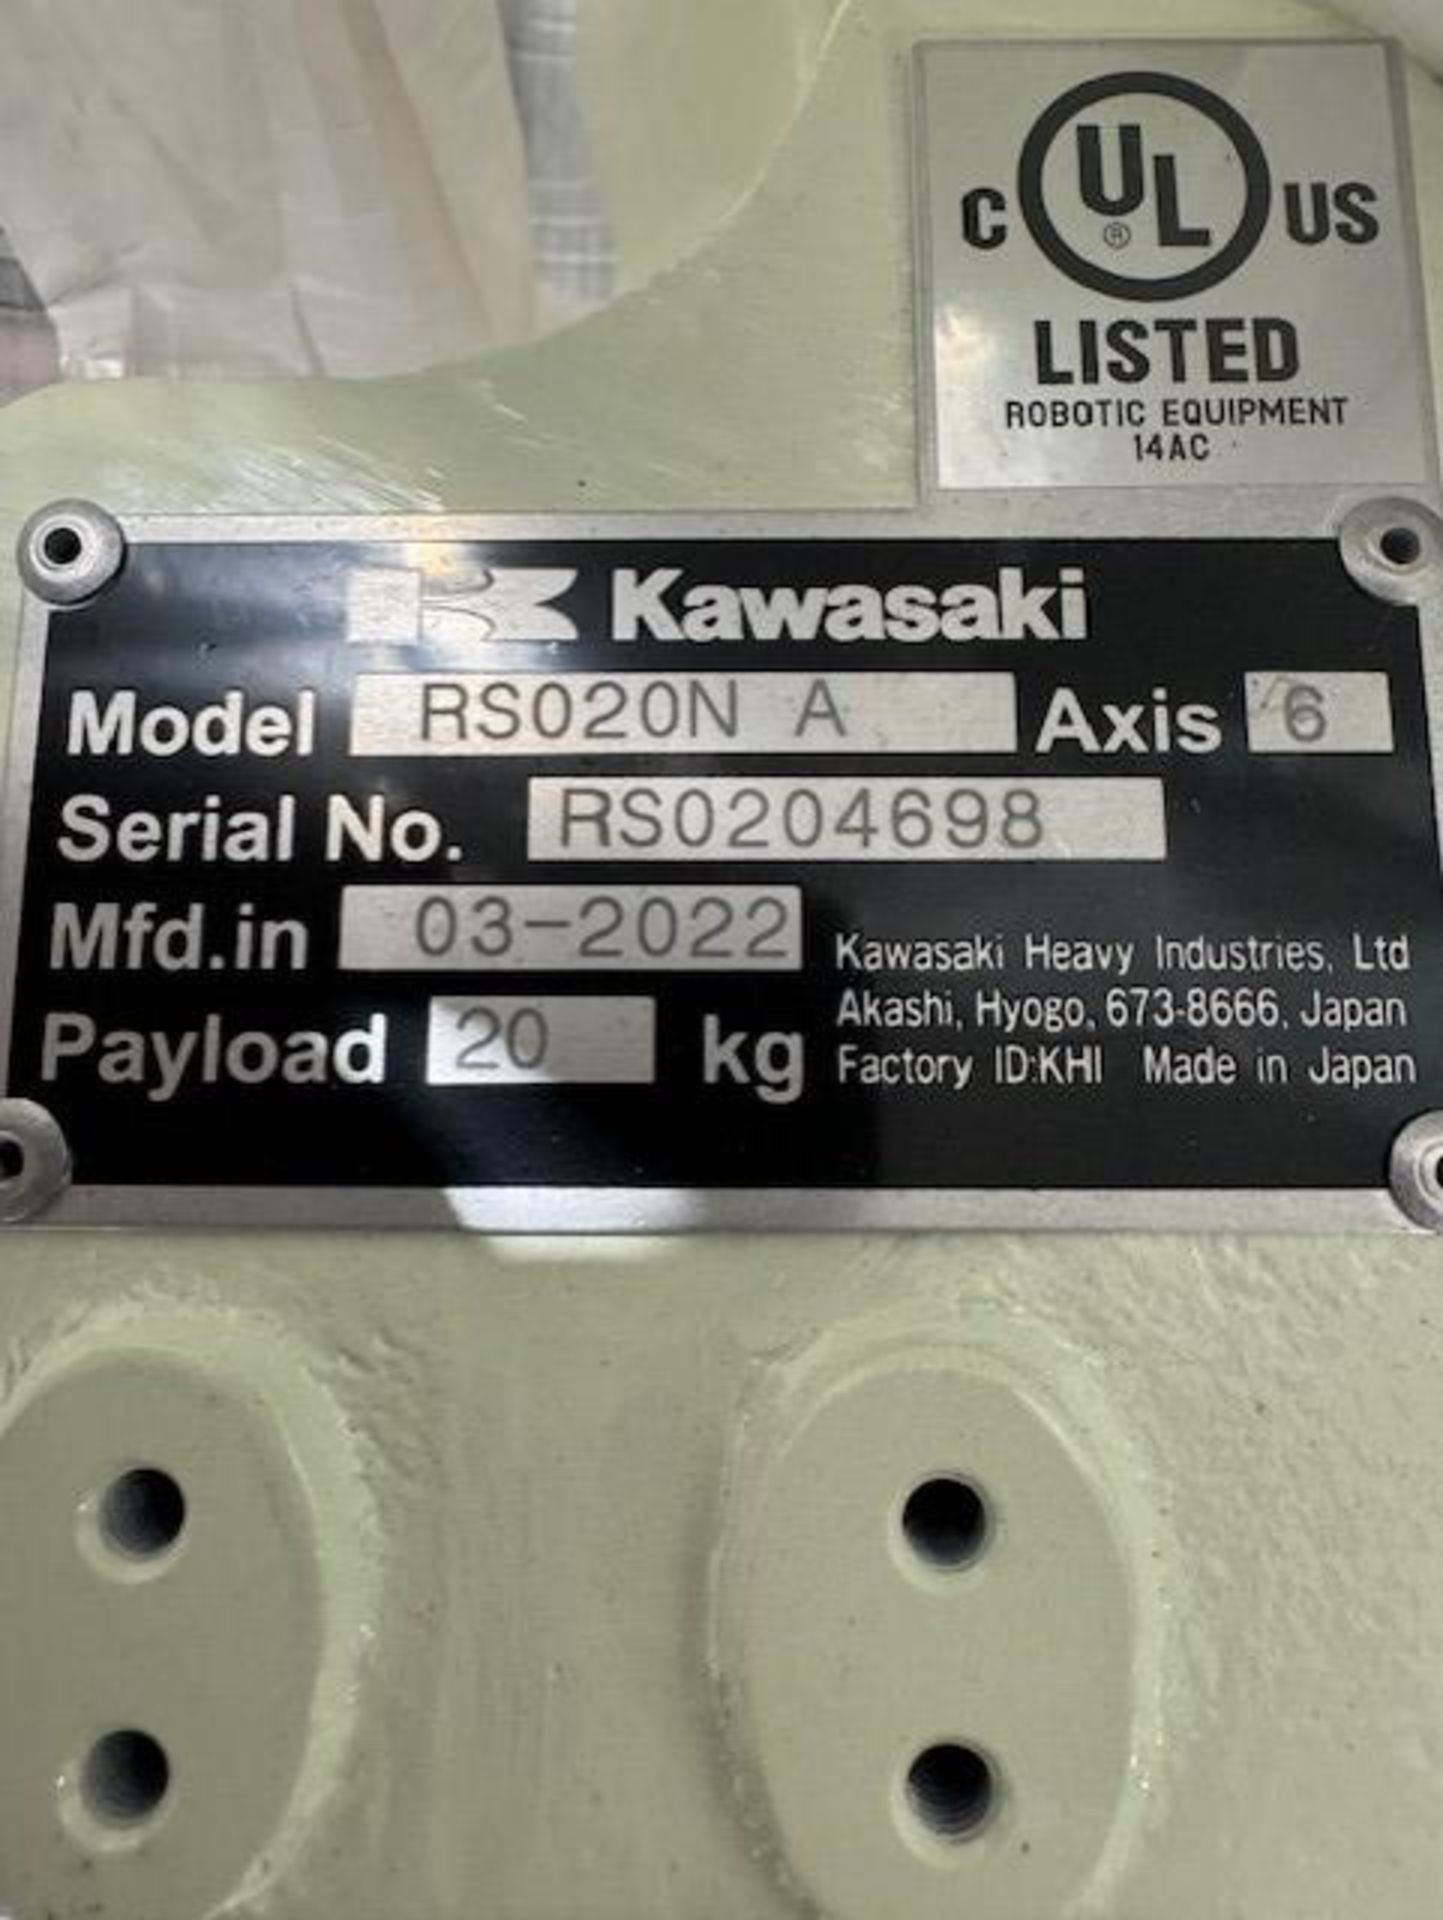 NEW KAWASAKI ROBOT MODEL RS020N, SN 4698, 20KG X 1725MM REACH WITH EO1 CONTROLS, CABLES & TEACH - Image 7 of 7